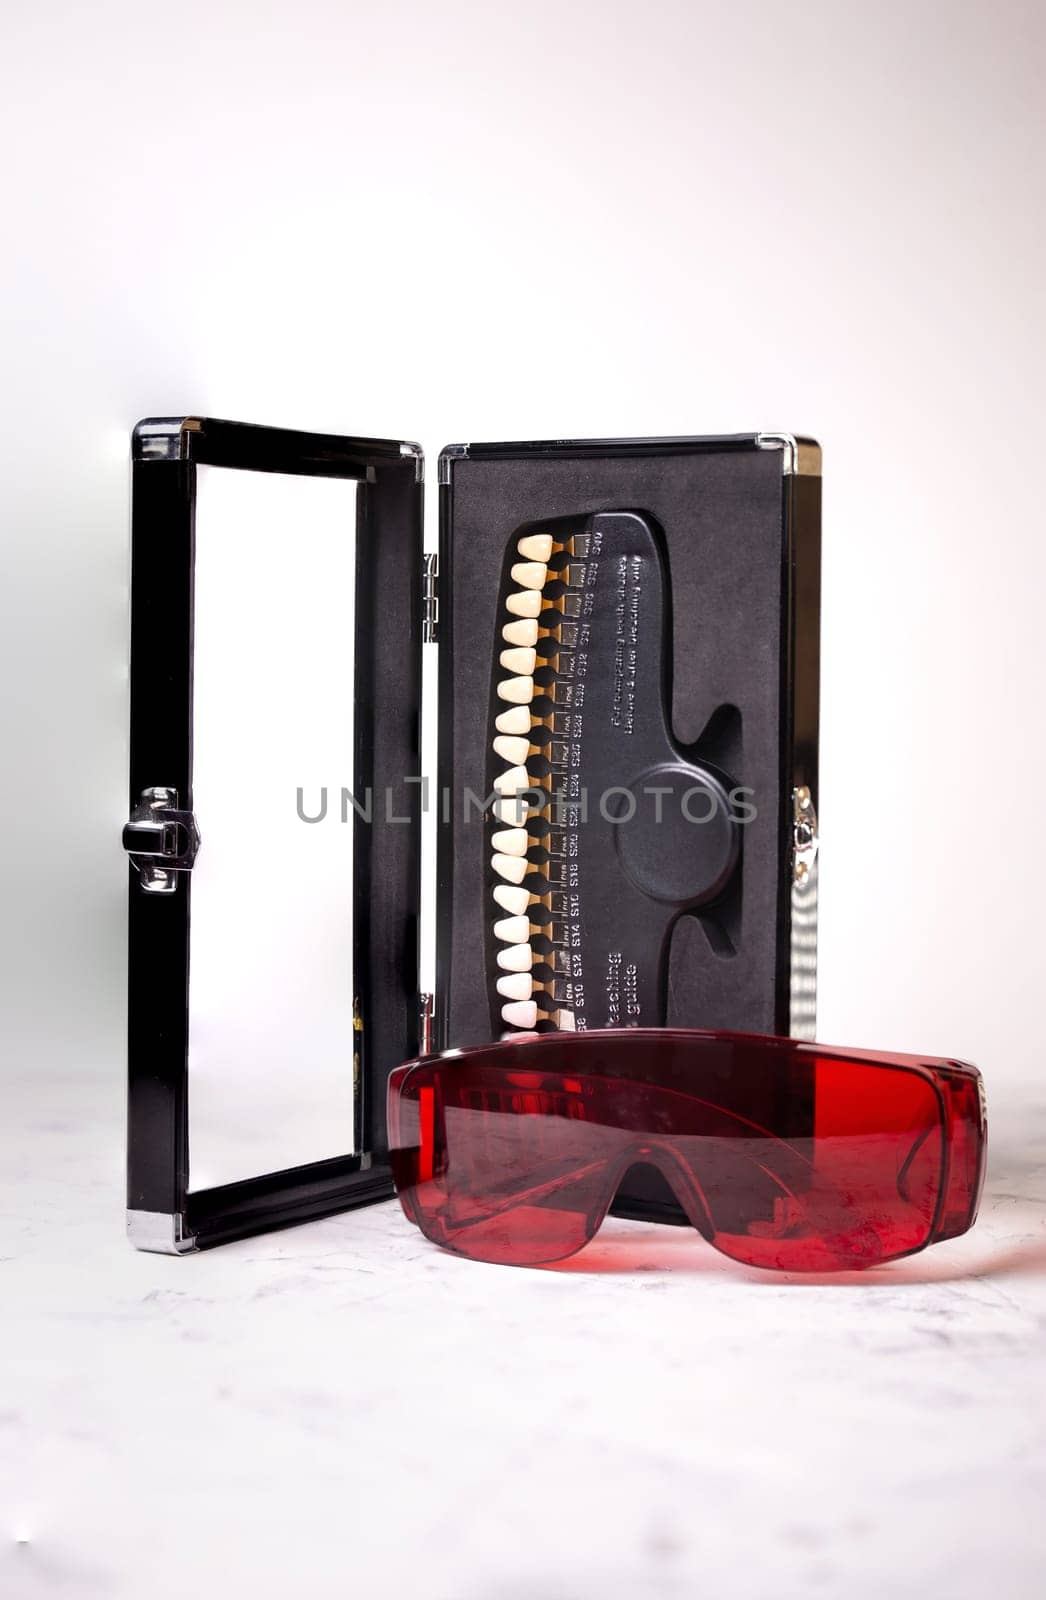 Dental equipment for the selection of the shade and color of teeth in close-up on a white background.